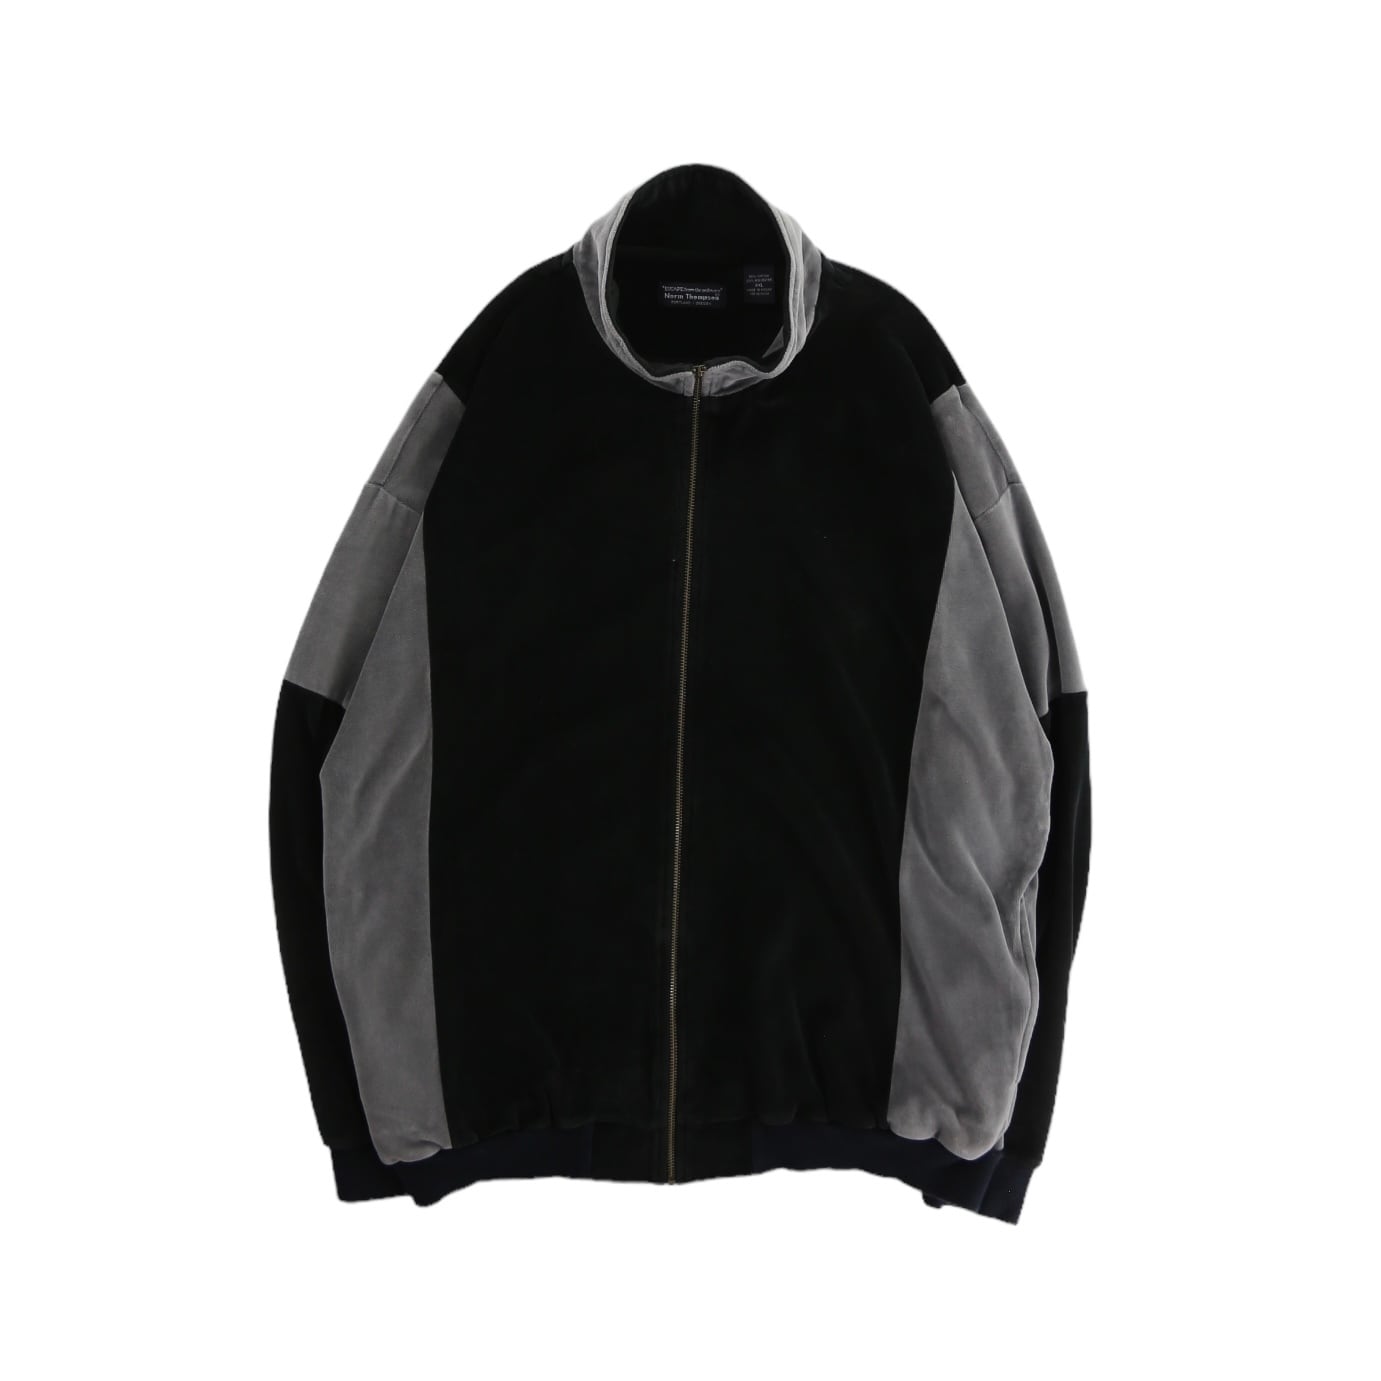 【COUOTSU】Norm Thompson over sized velor track jacket made in macau -378-